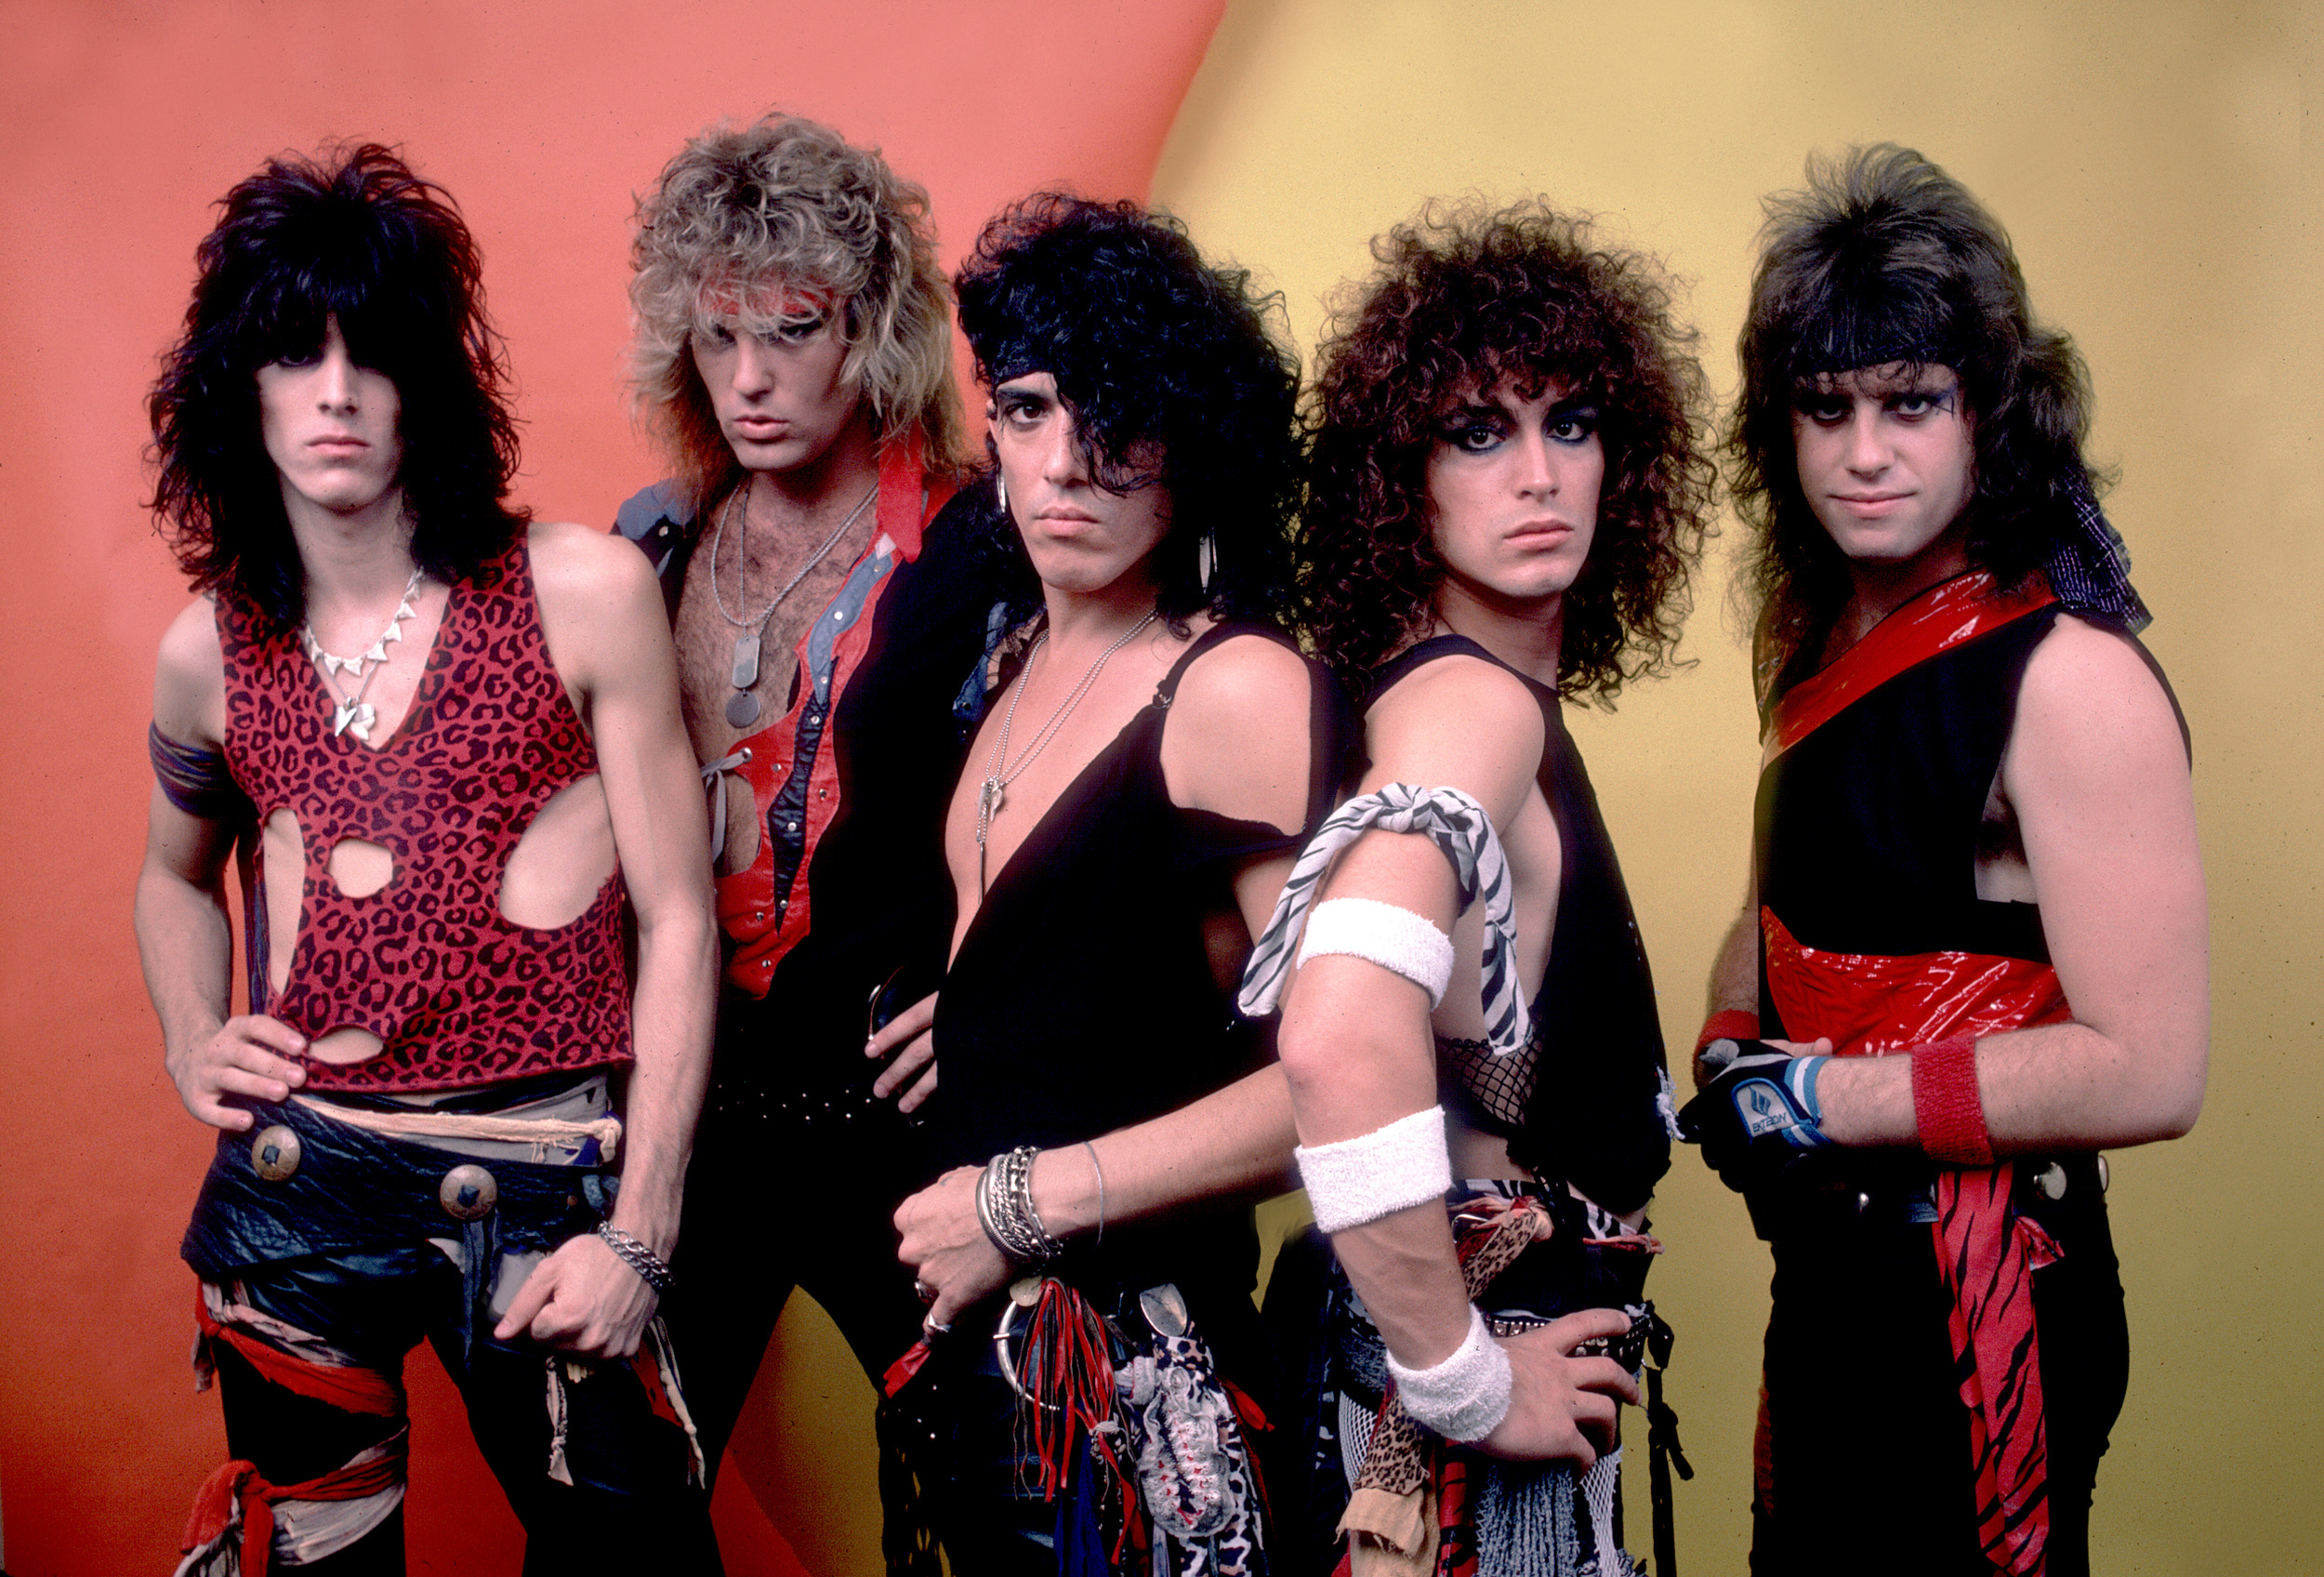 <p>Ratt was one of the first true giants of the hair metal scene thanks to its breakout debut, <em>Out of the Cellar</em> (1984), which produced the hit <a href="https://www.youtube.com/watch?v=0u8teXR8VE4">"Round and Round,"</a> one of the most popular and recognizable songs to come out of the scene. Though former lead guitarist Warren DeMartini is one of the top guitar players out there, frontman Stephen Pearcy<span> drew most of the attention with his good looks and sense of pop-metal fashion. Truly one of the bands that defined this era in music.</span></p><p>You may also like: <a href='https://www.yardbarker.com/entertainment/articles/25_movie_stars_who_made_the_move_to_tv_020924/s1__38135780'>25 movie stars who made the move to TV</a></p>